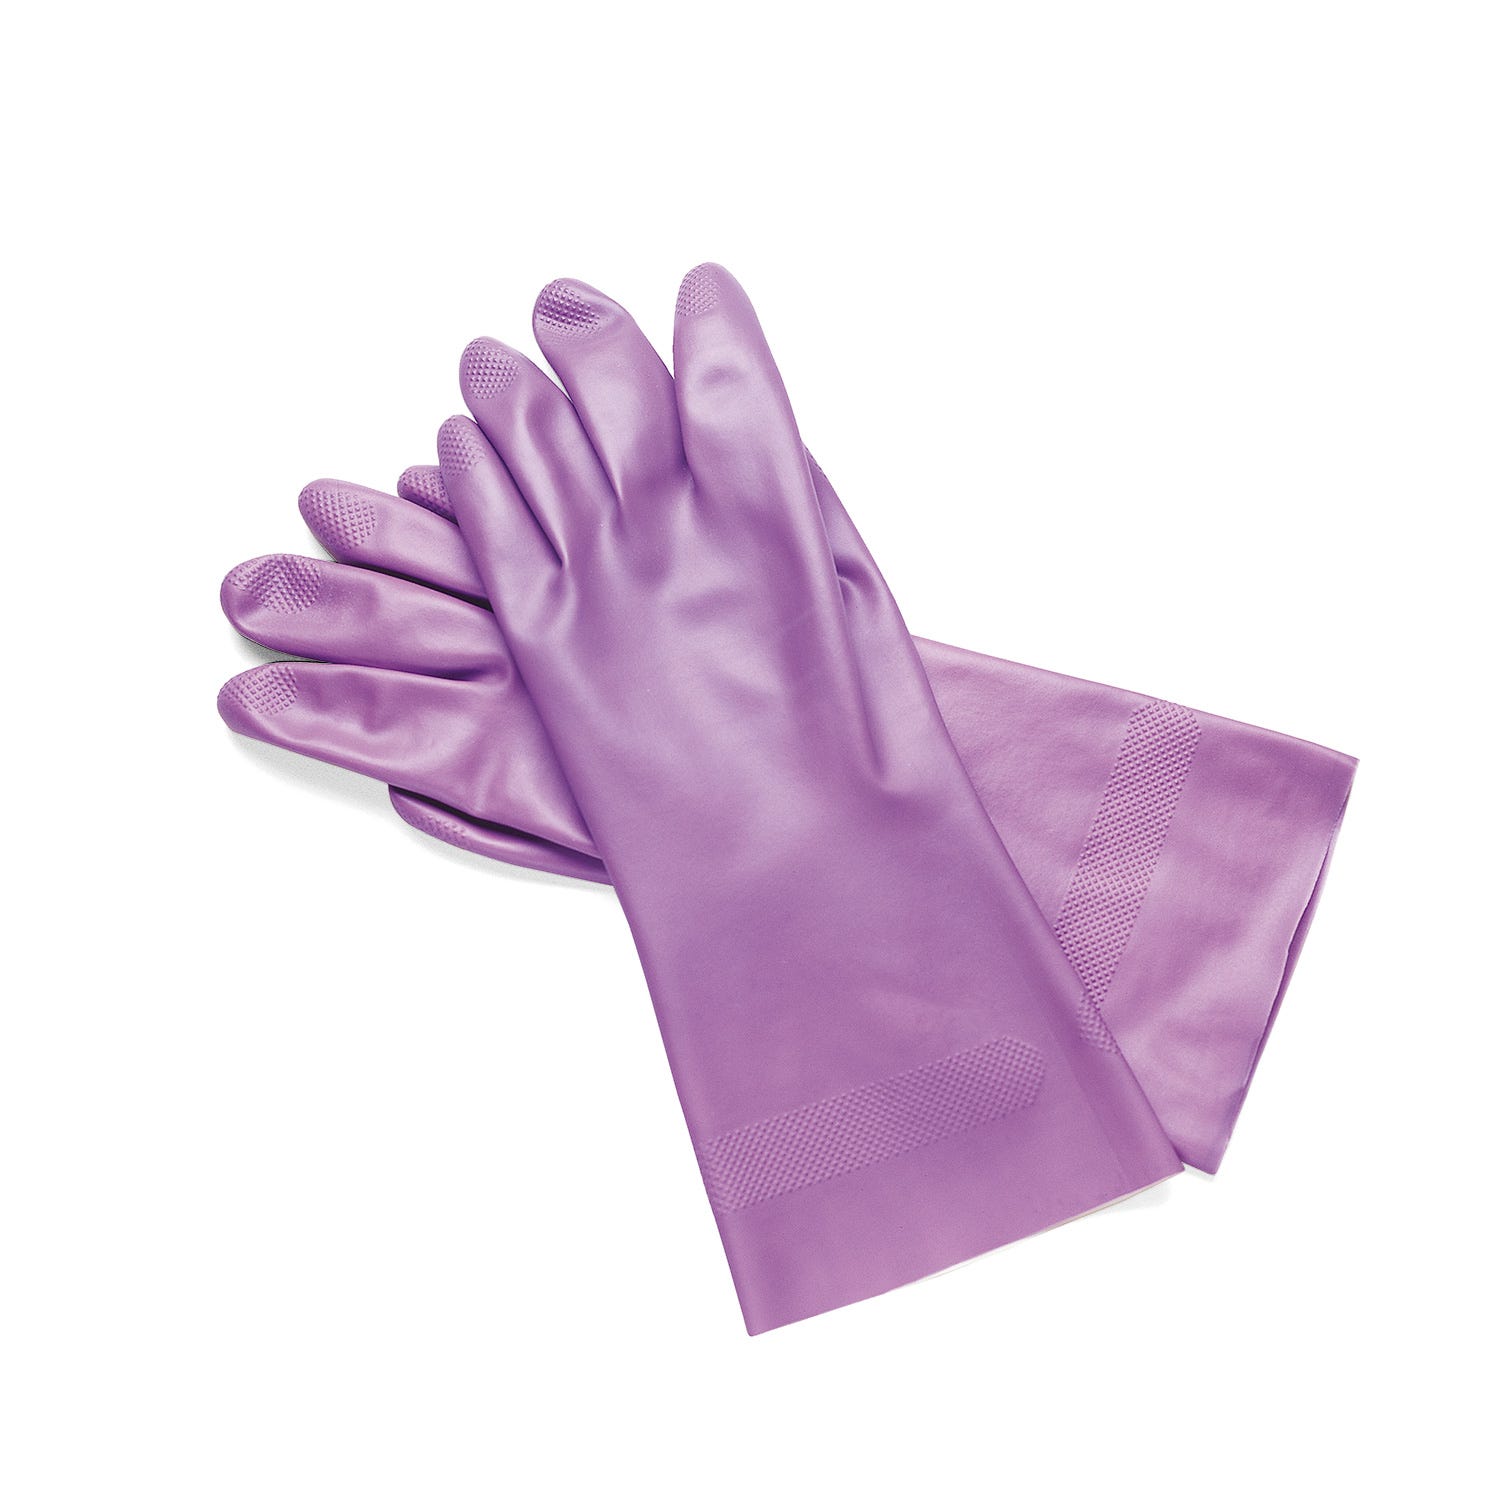 Glove Nitrile Utility Small, Size 7, Lilac - 3prs/Pack